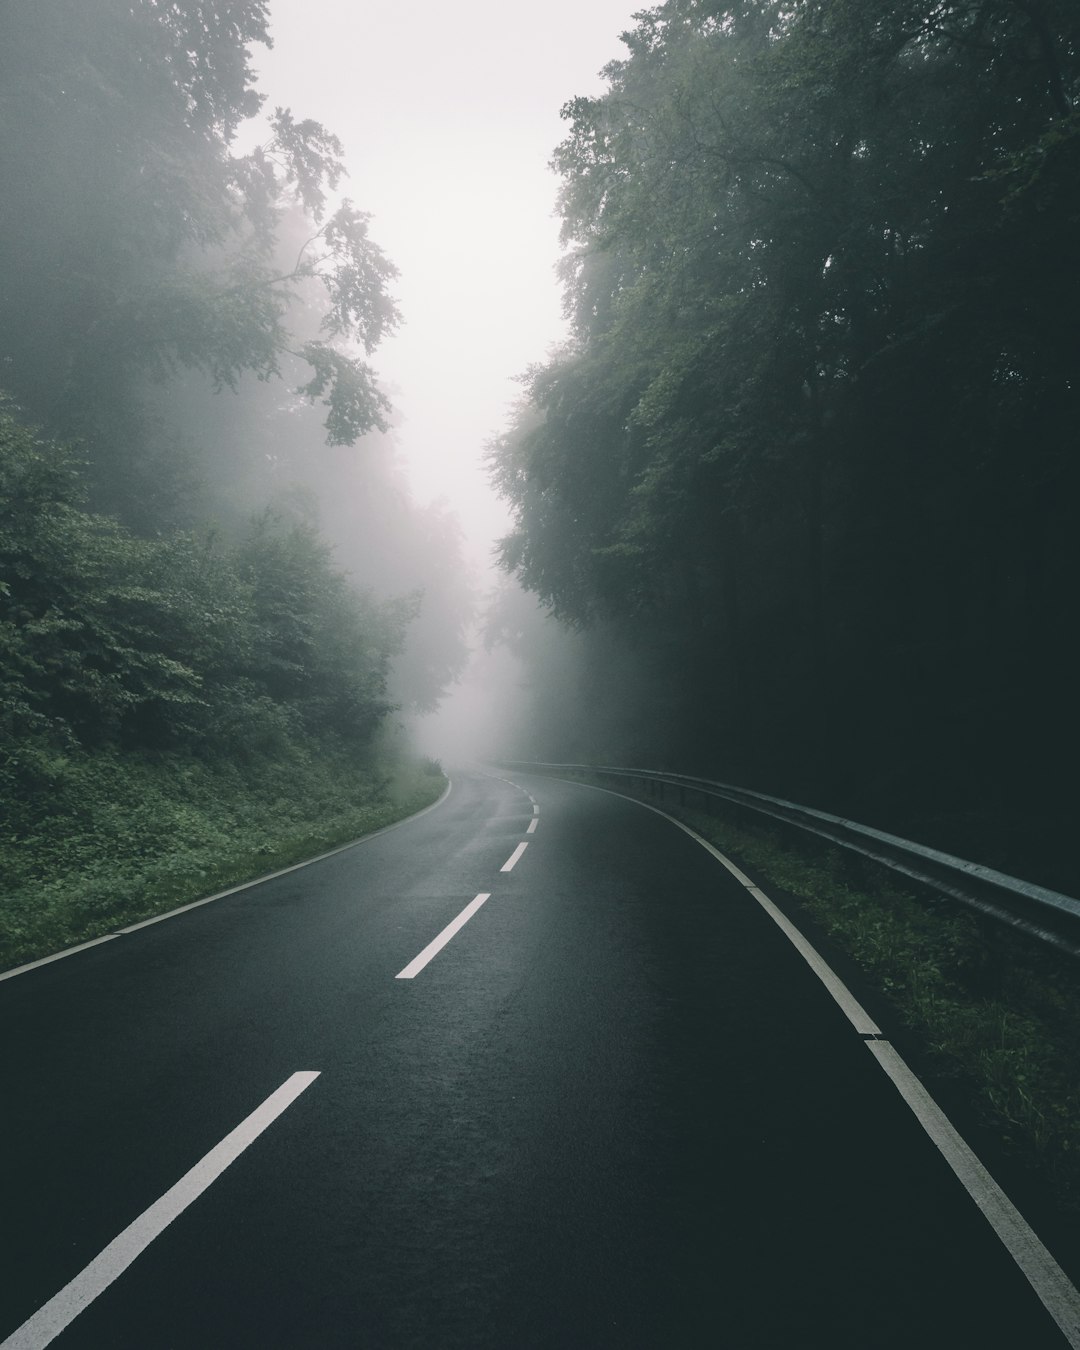 A photo of an empty road in the foggy forest, white lines on asphalt winding up and down, in the style of unsplash photography, with dark green and gray tones, in a minimalistic style. –ar 51:64